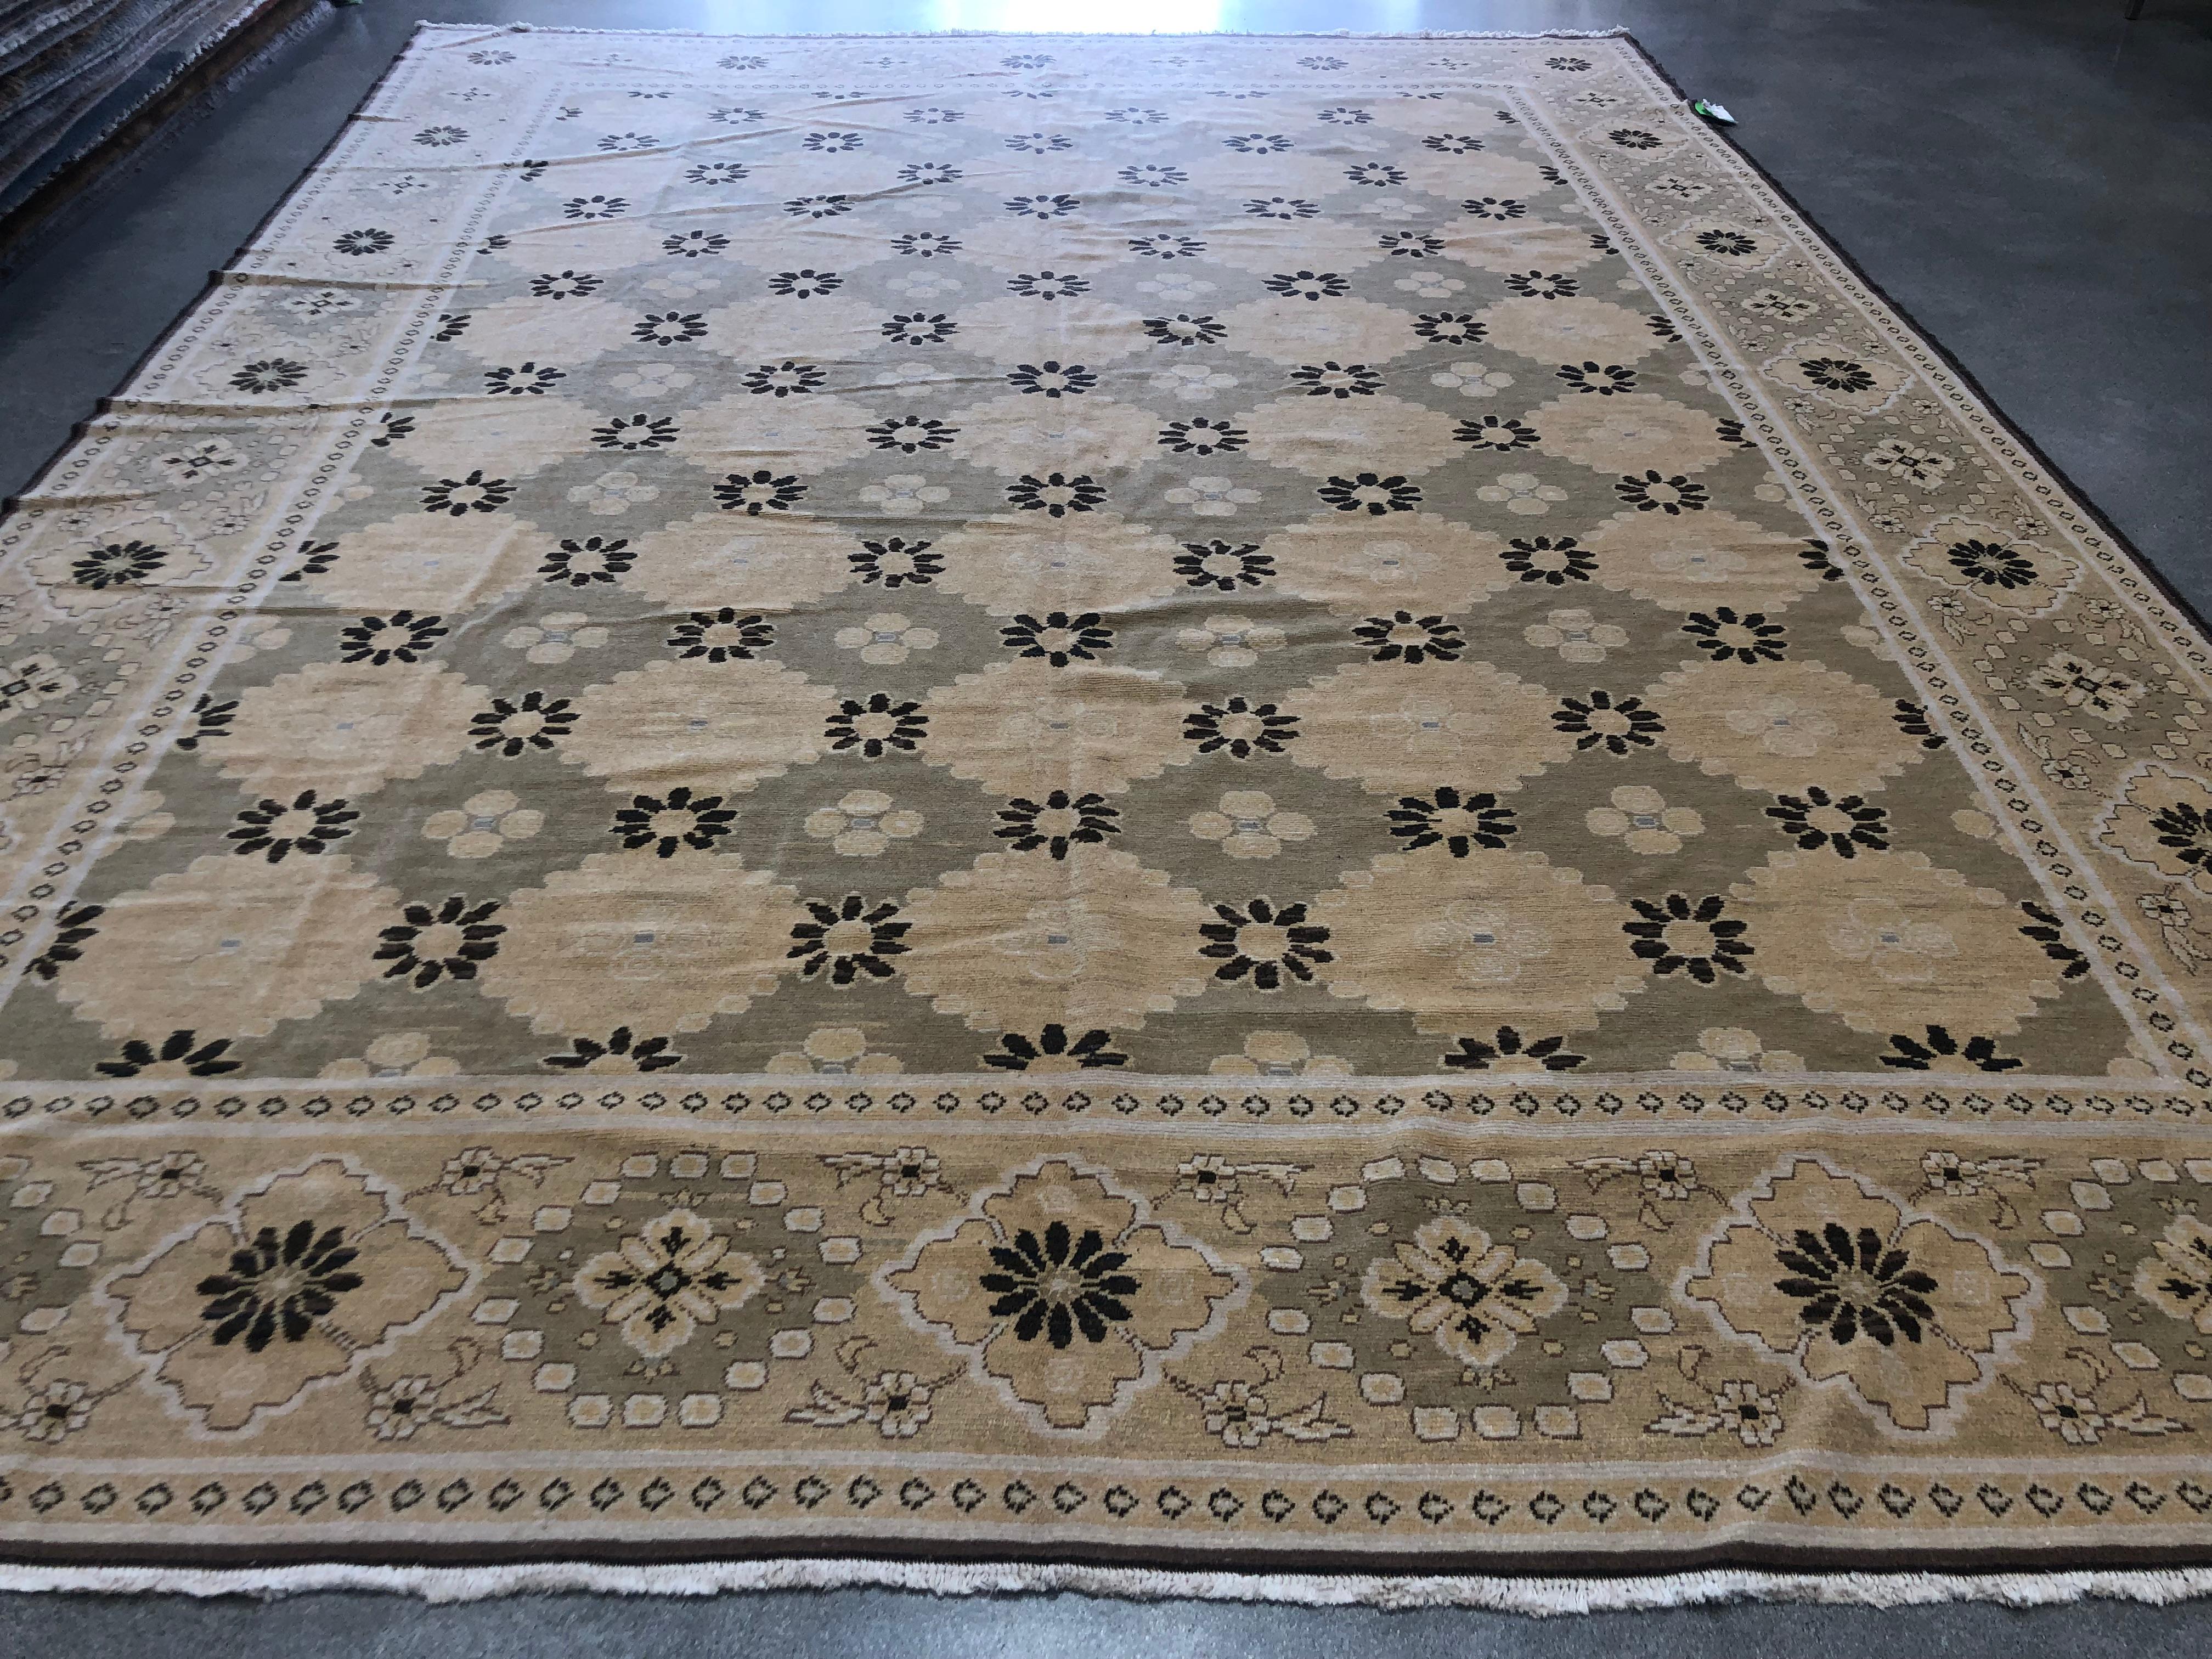 Blossoms and diamonds frame a contrasting pattern of yellow and brown flowers in this variation of a popular style. A taupe backdrop creates a unified look. Hand knotted wool.